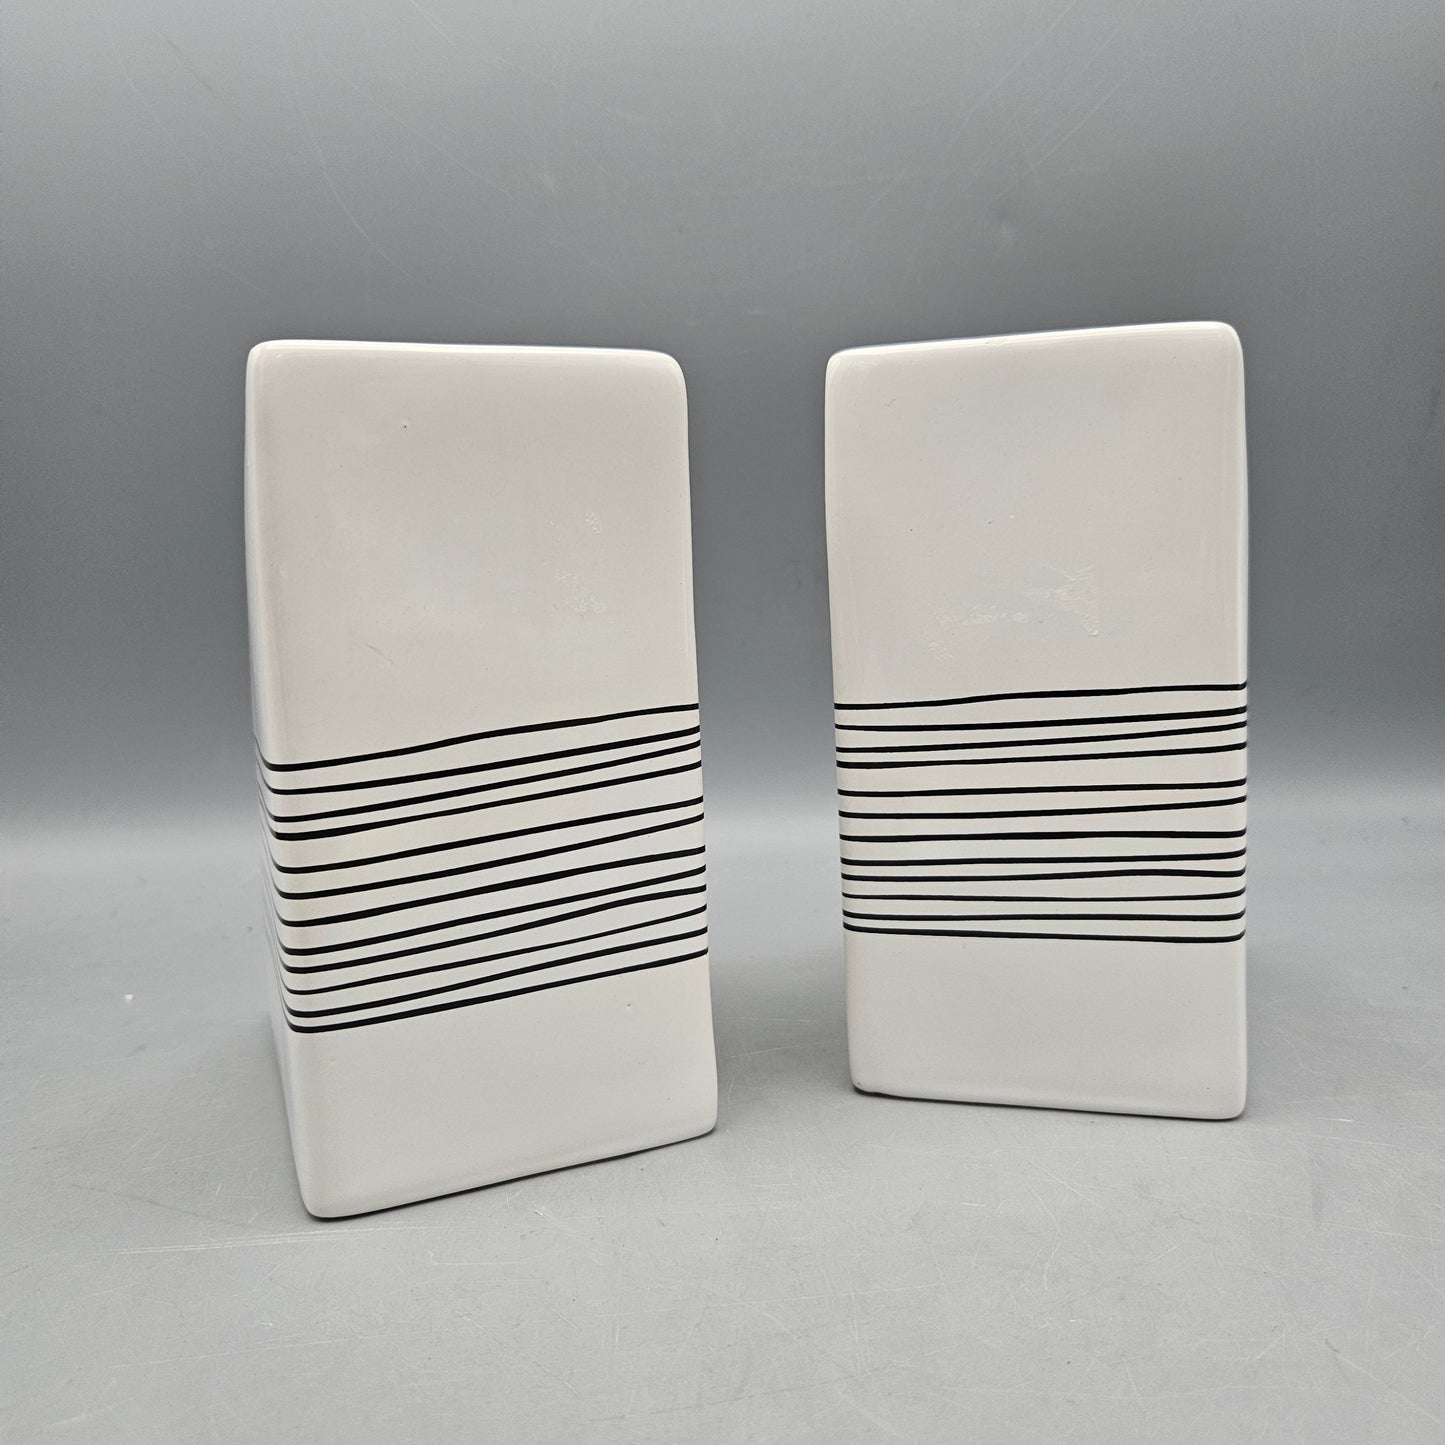 Pair of Modernist Ceramic Bookends